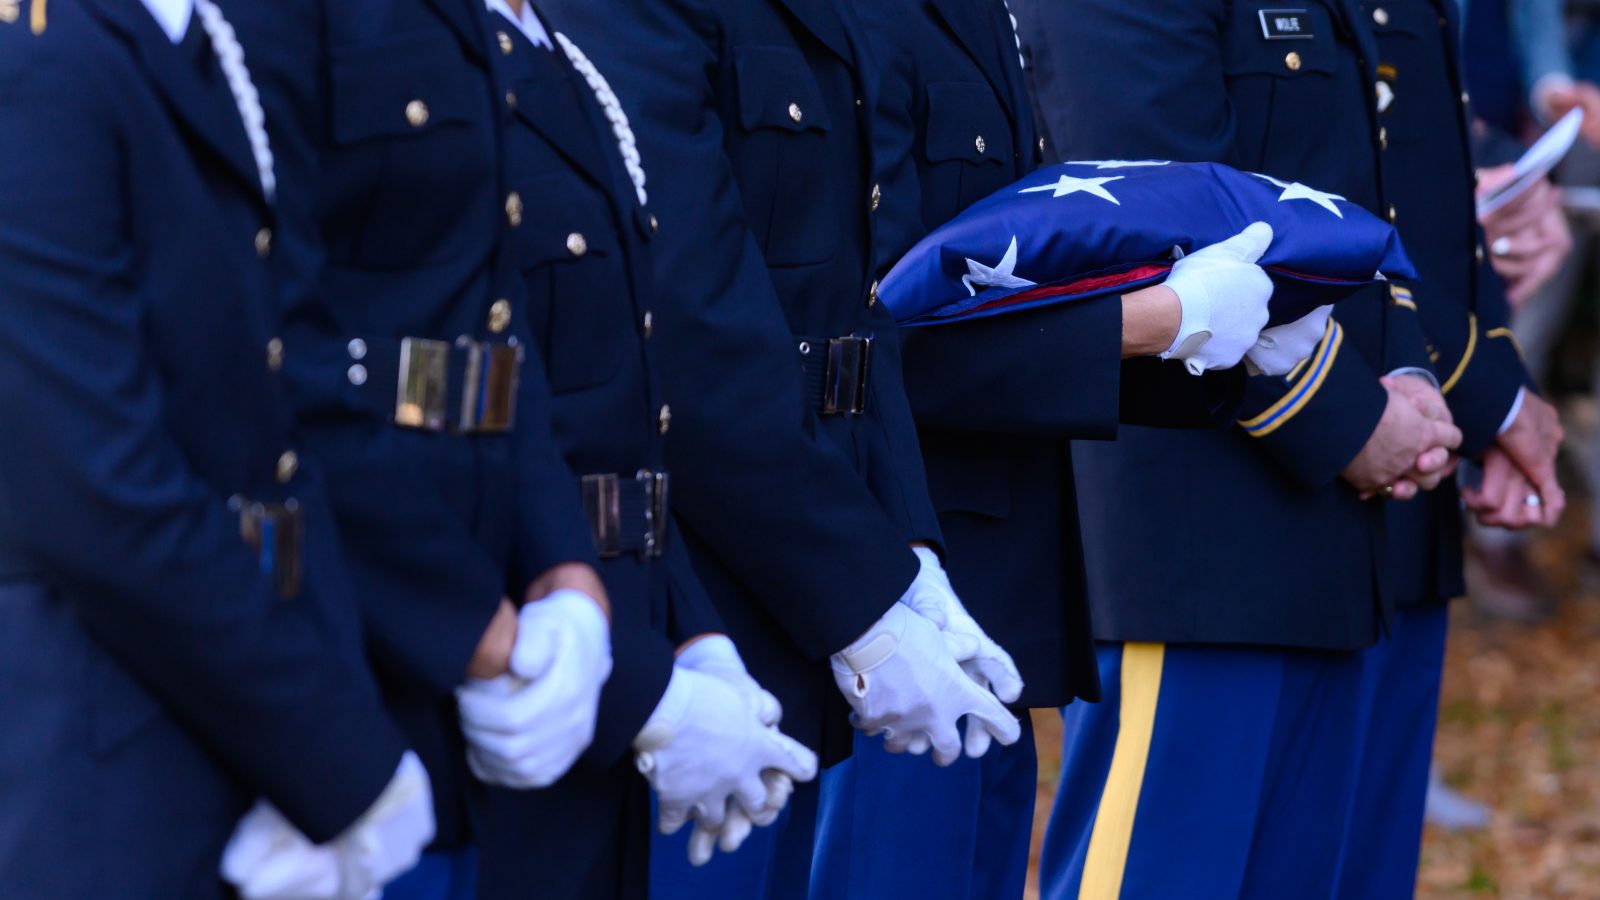 Servicemembers standing with a folded American flag